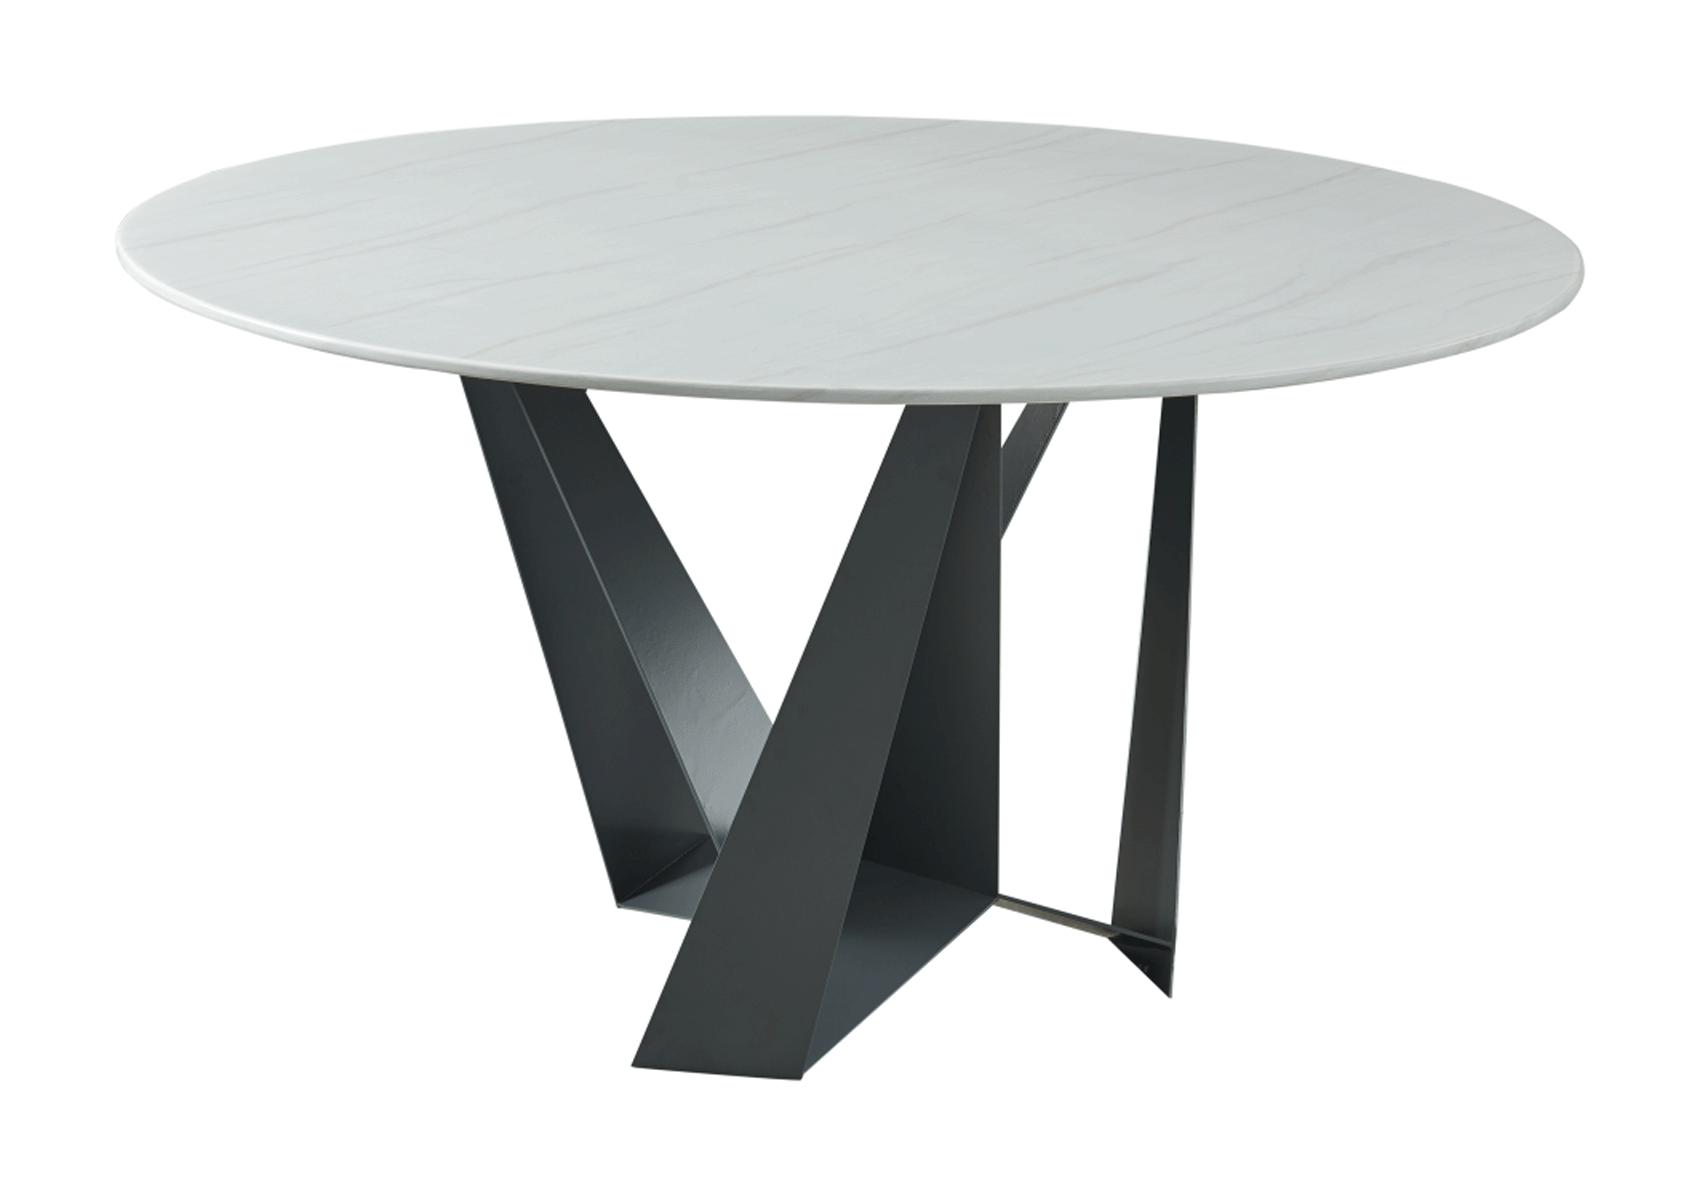 Contemporary Dining Table 102DININGTABLE 102DININGTABLE in Dark Grey, White 